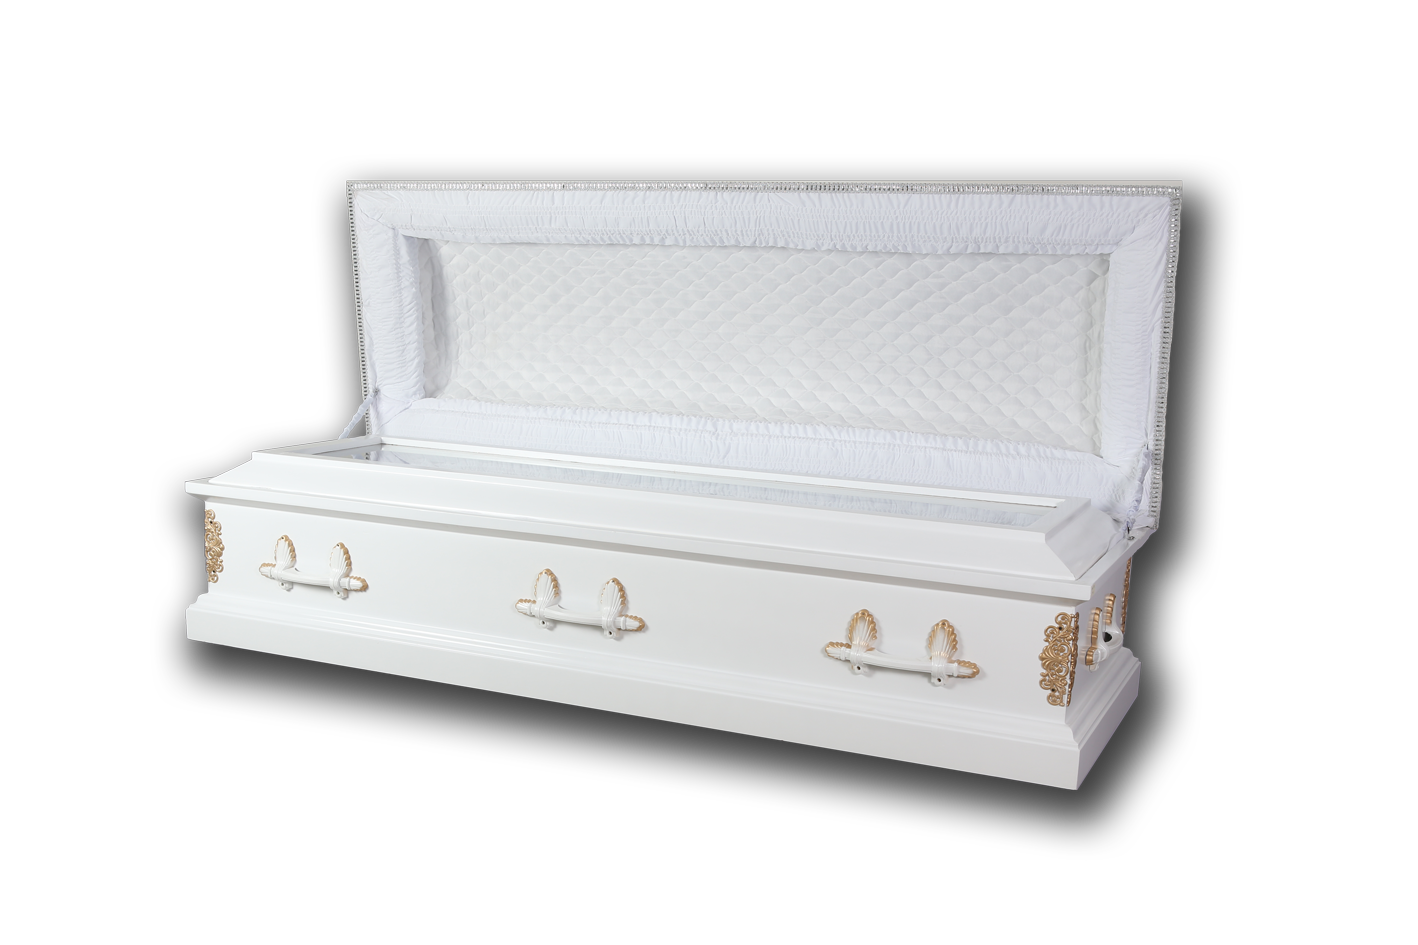  Included casket from ST. DOMINIQUE traditional pre-need plan from St Peter Life plan